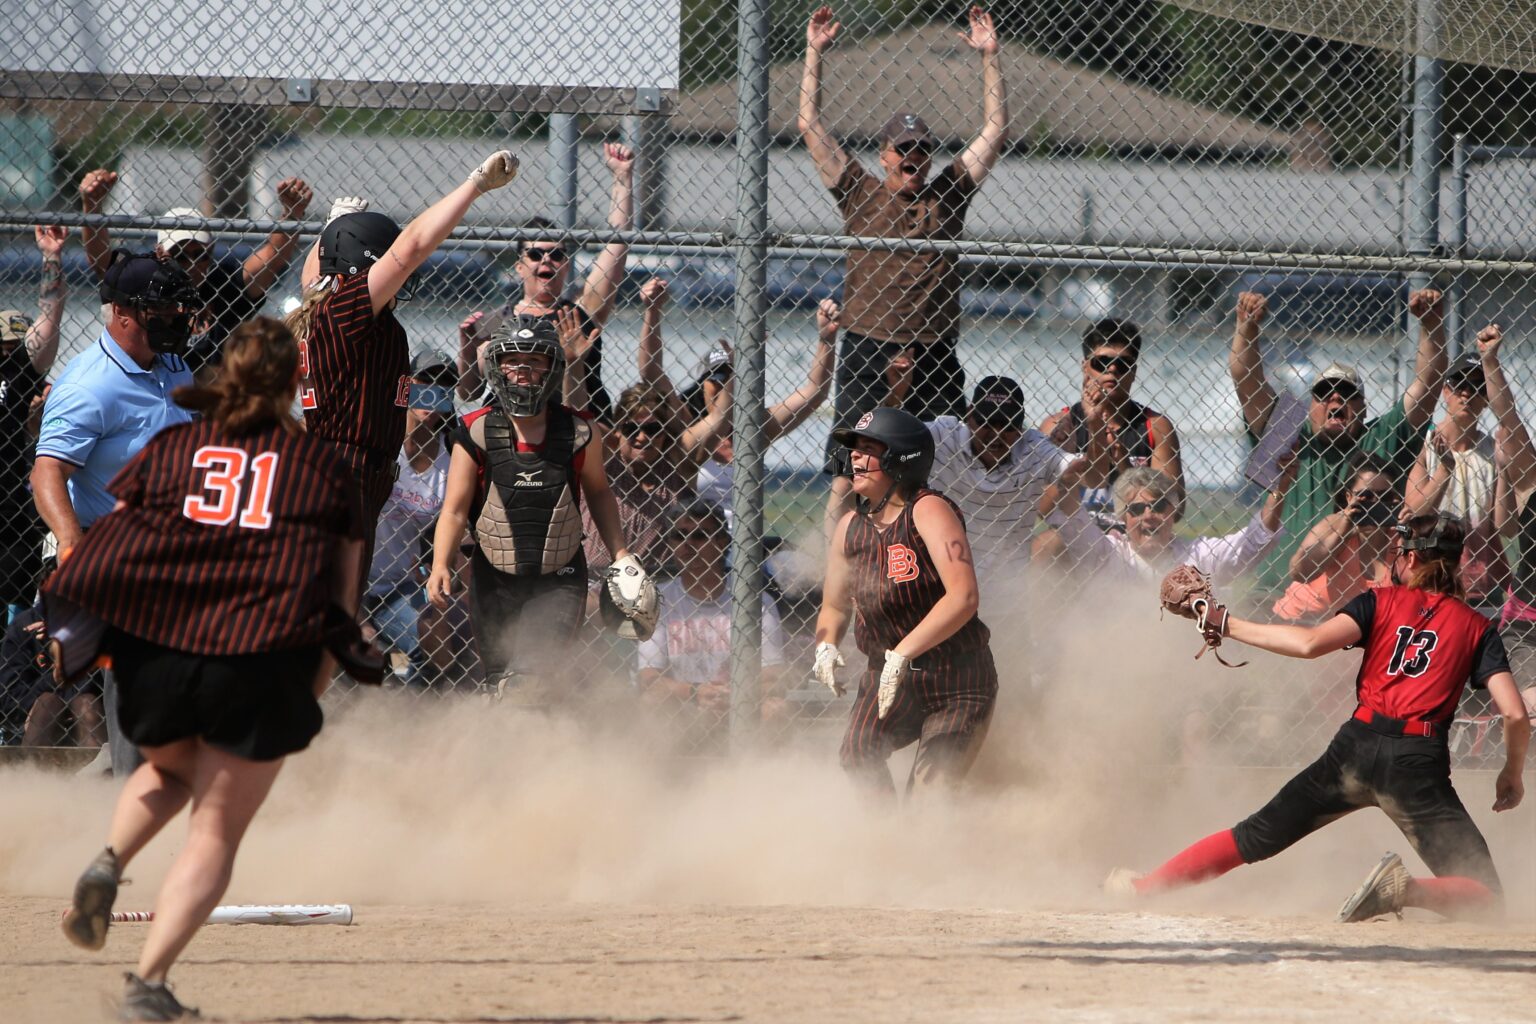 The crowd cheers from behind the chain-linked fence as Blaine's Shaylie Daniels slides home leaving behind a dust trail as her teammates jump and celebrate.